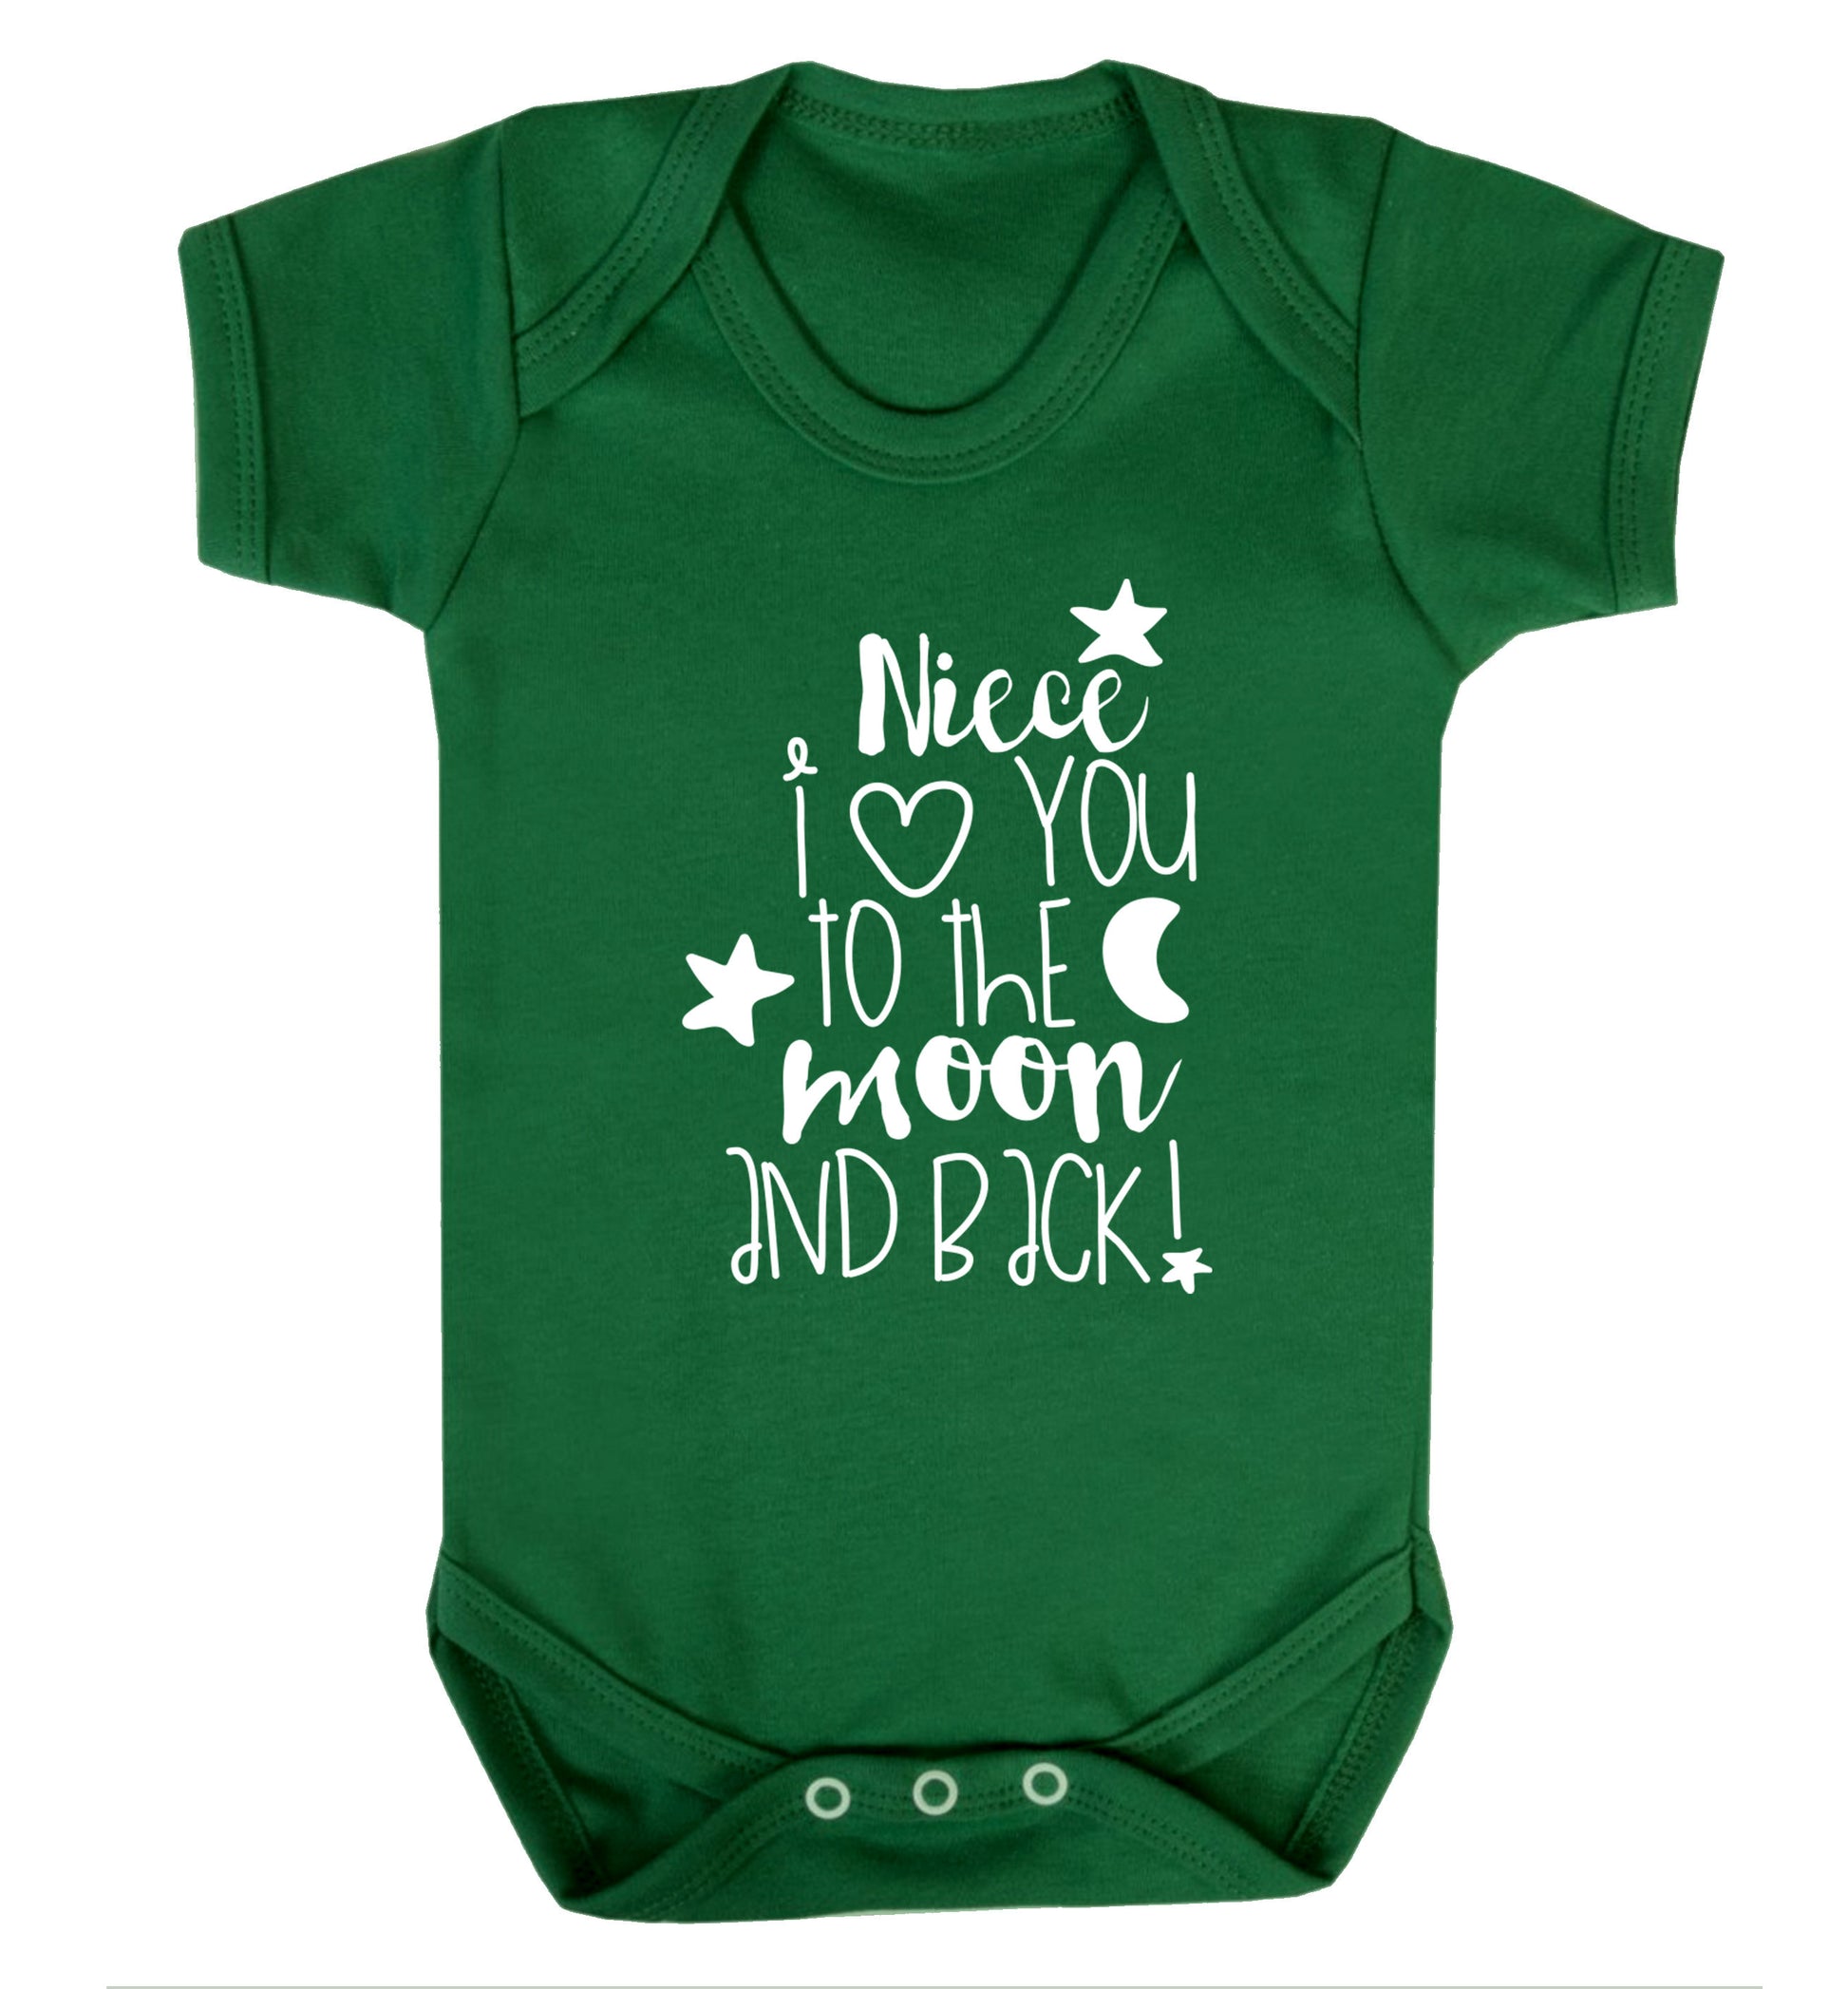 Niece I love you to the moon and back Baby Vest green 18-24 months